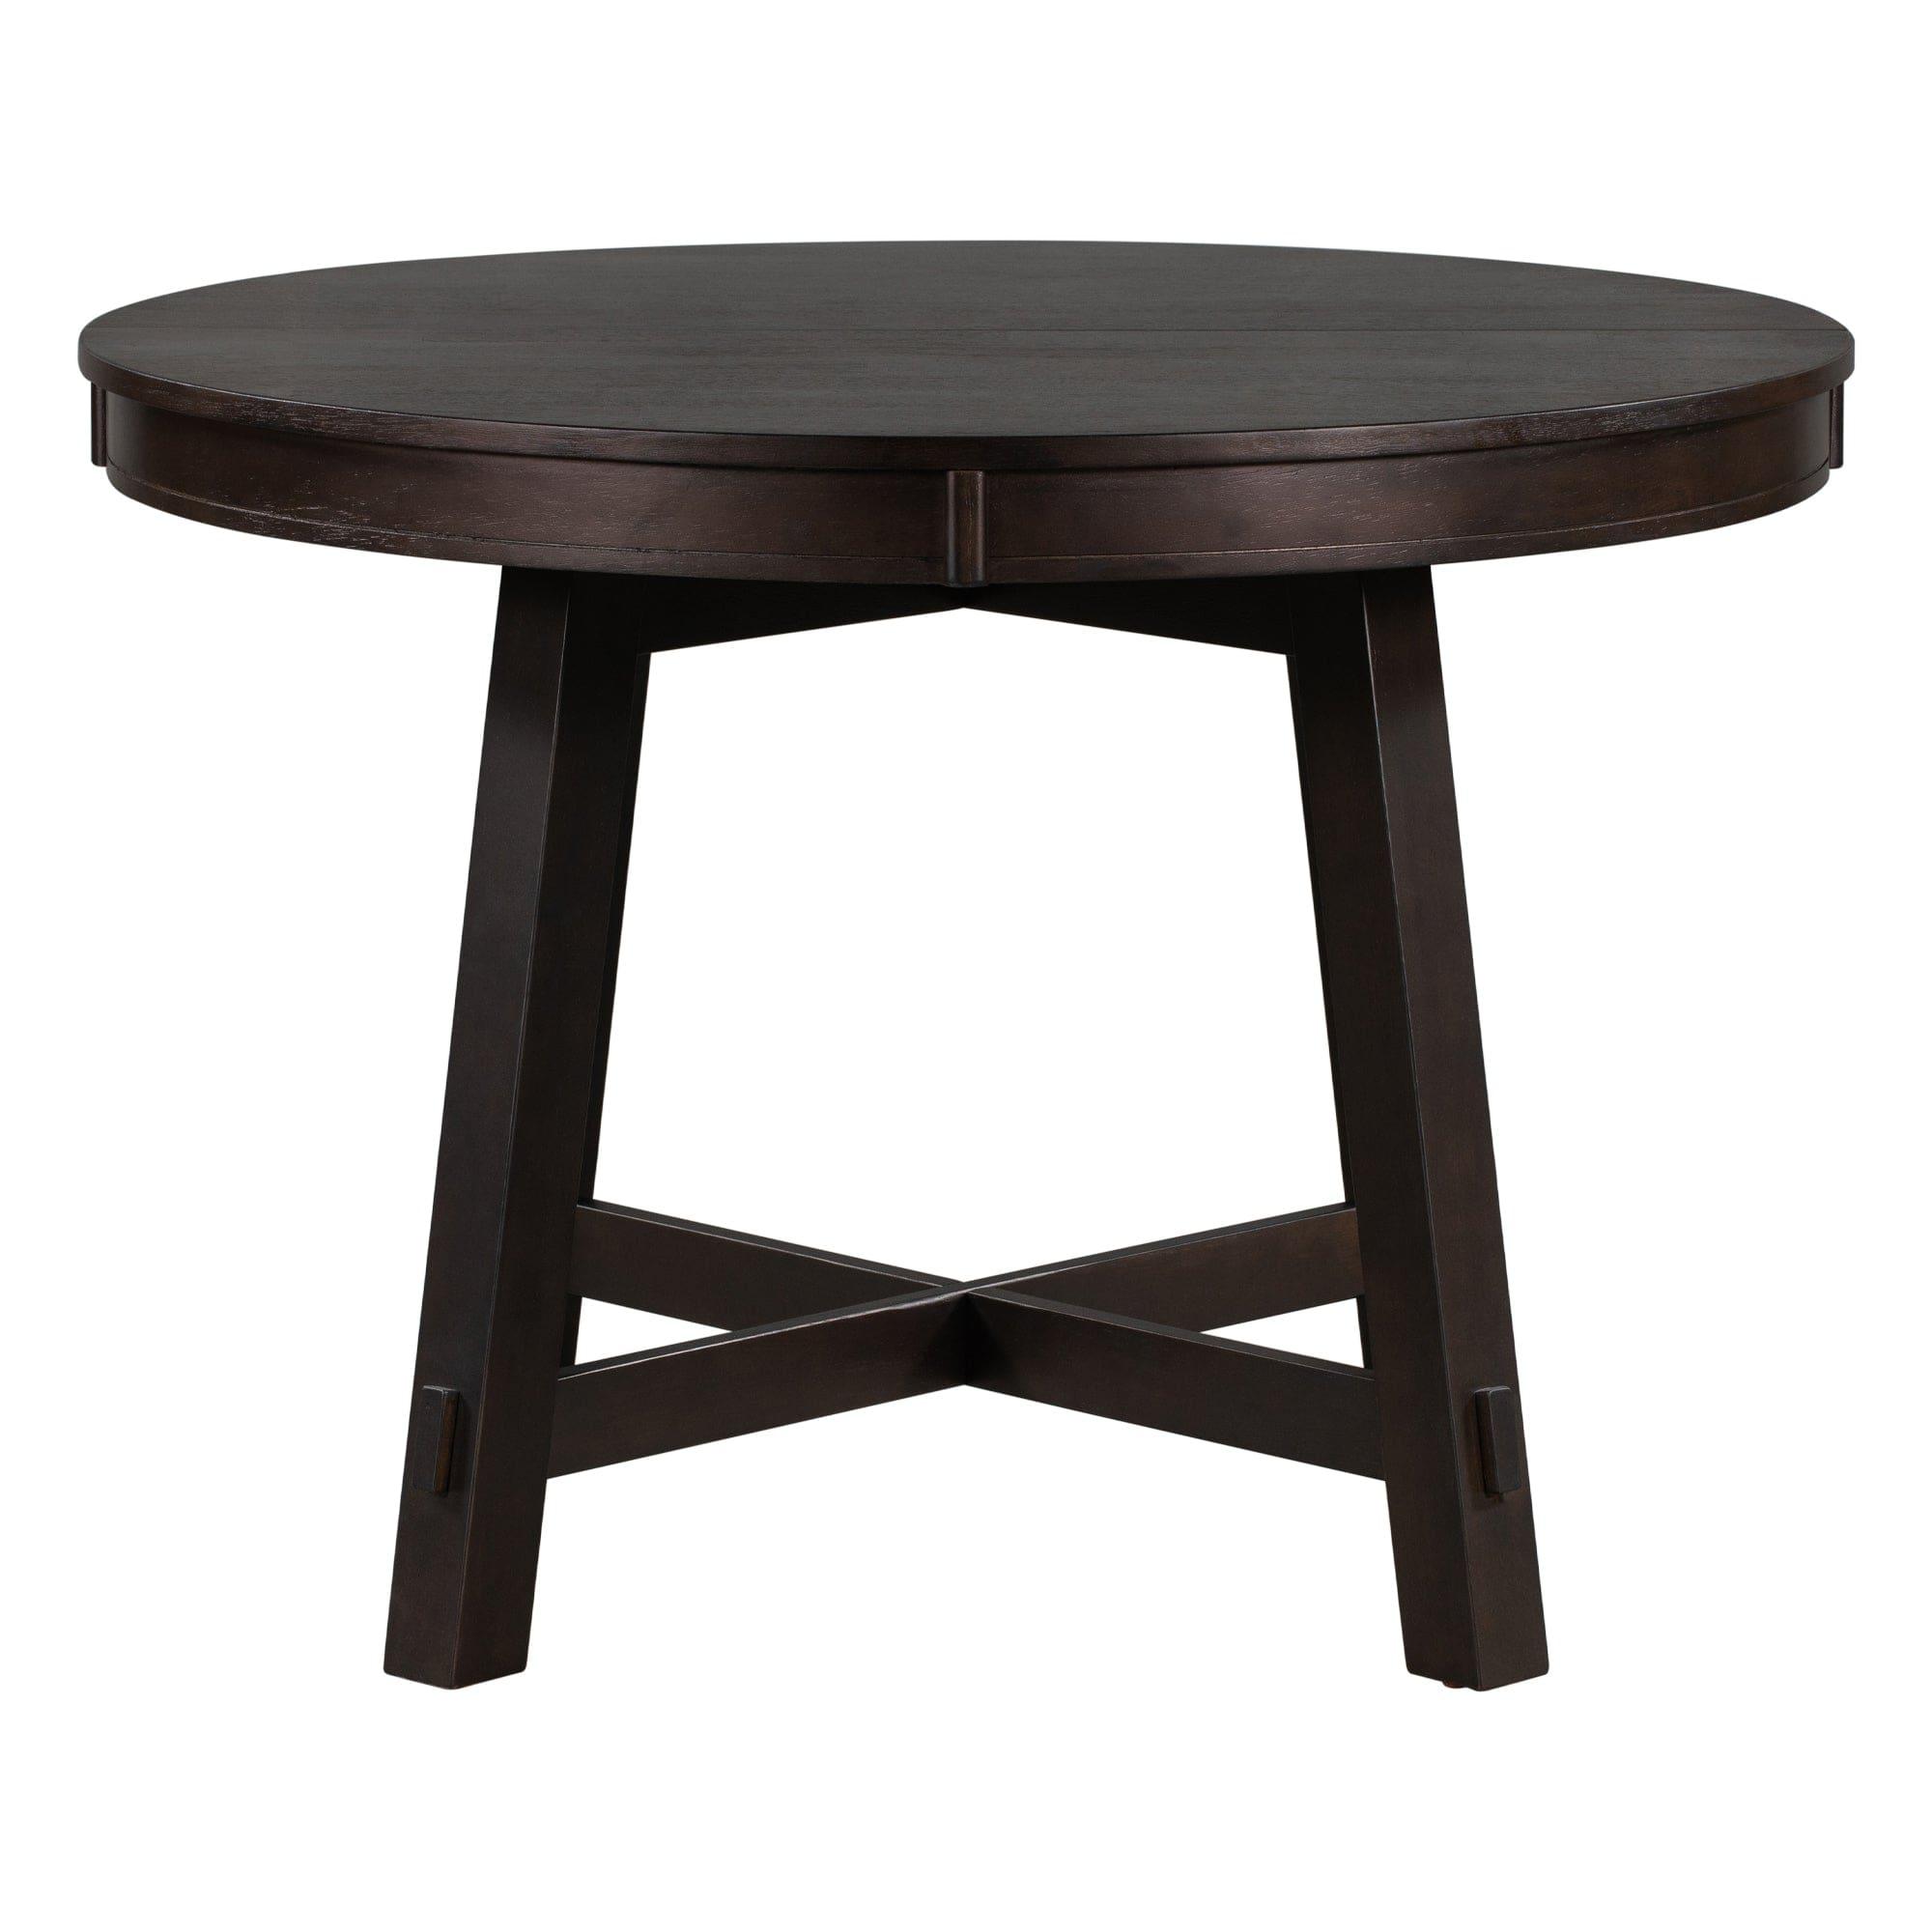 Shop TREXM Farmhouse Round Extendable Dining Table with 16" Leaf Wood Kitchen Table (Espresso) Mademoiselle Home Decor